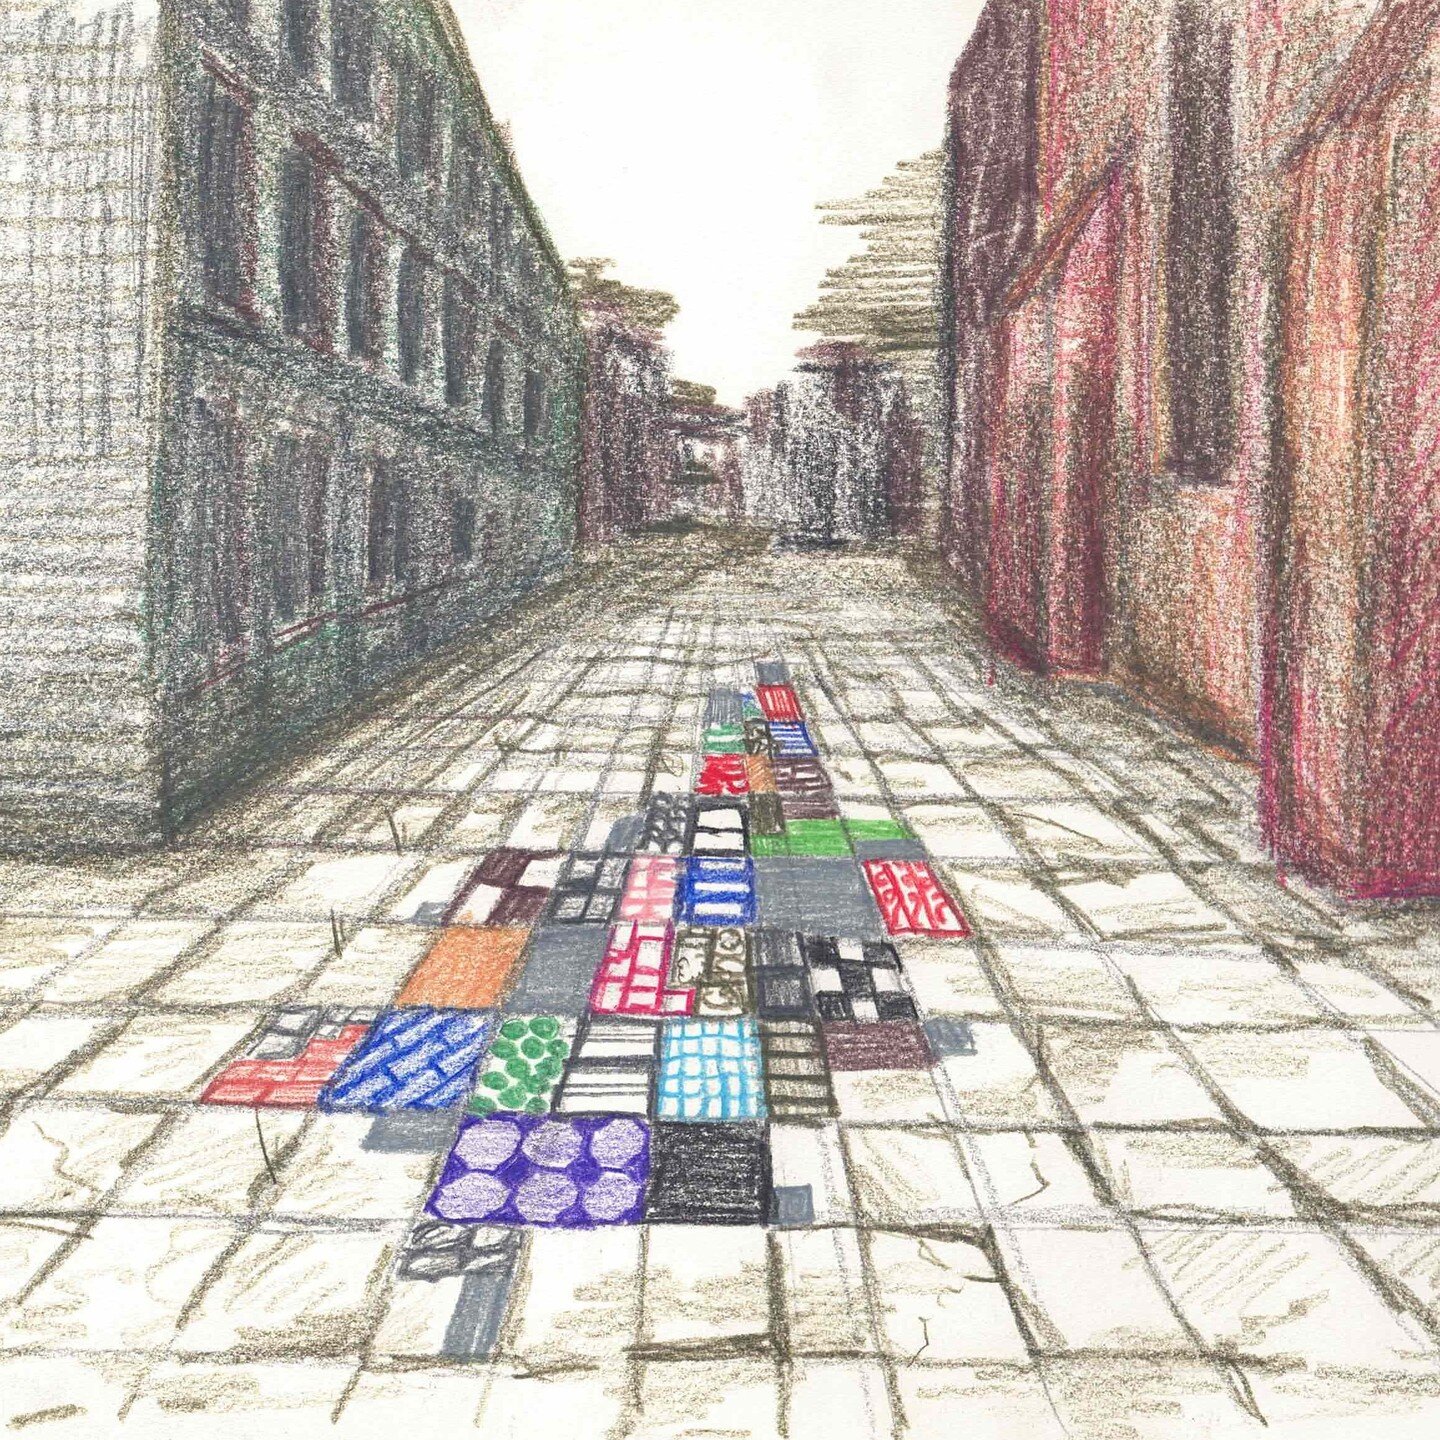 We have just launched the call for our first project for @sint_maarten_bovenschool starting on the 15th of April: a collective tiling work. All the students and staff are invited to bring left-over tiles from their homes to contribute to the school's